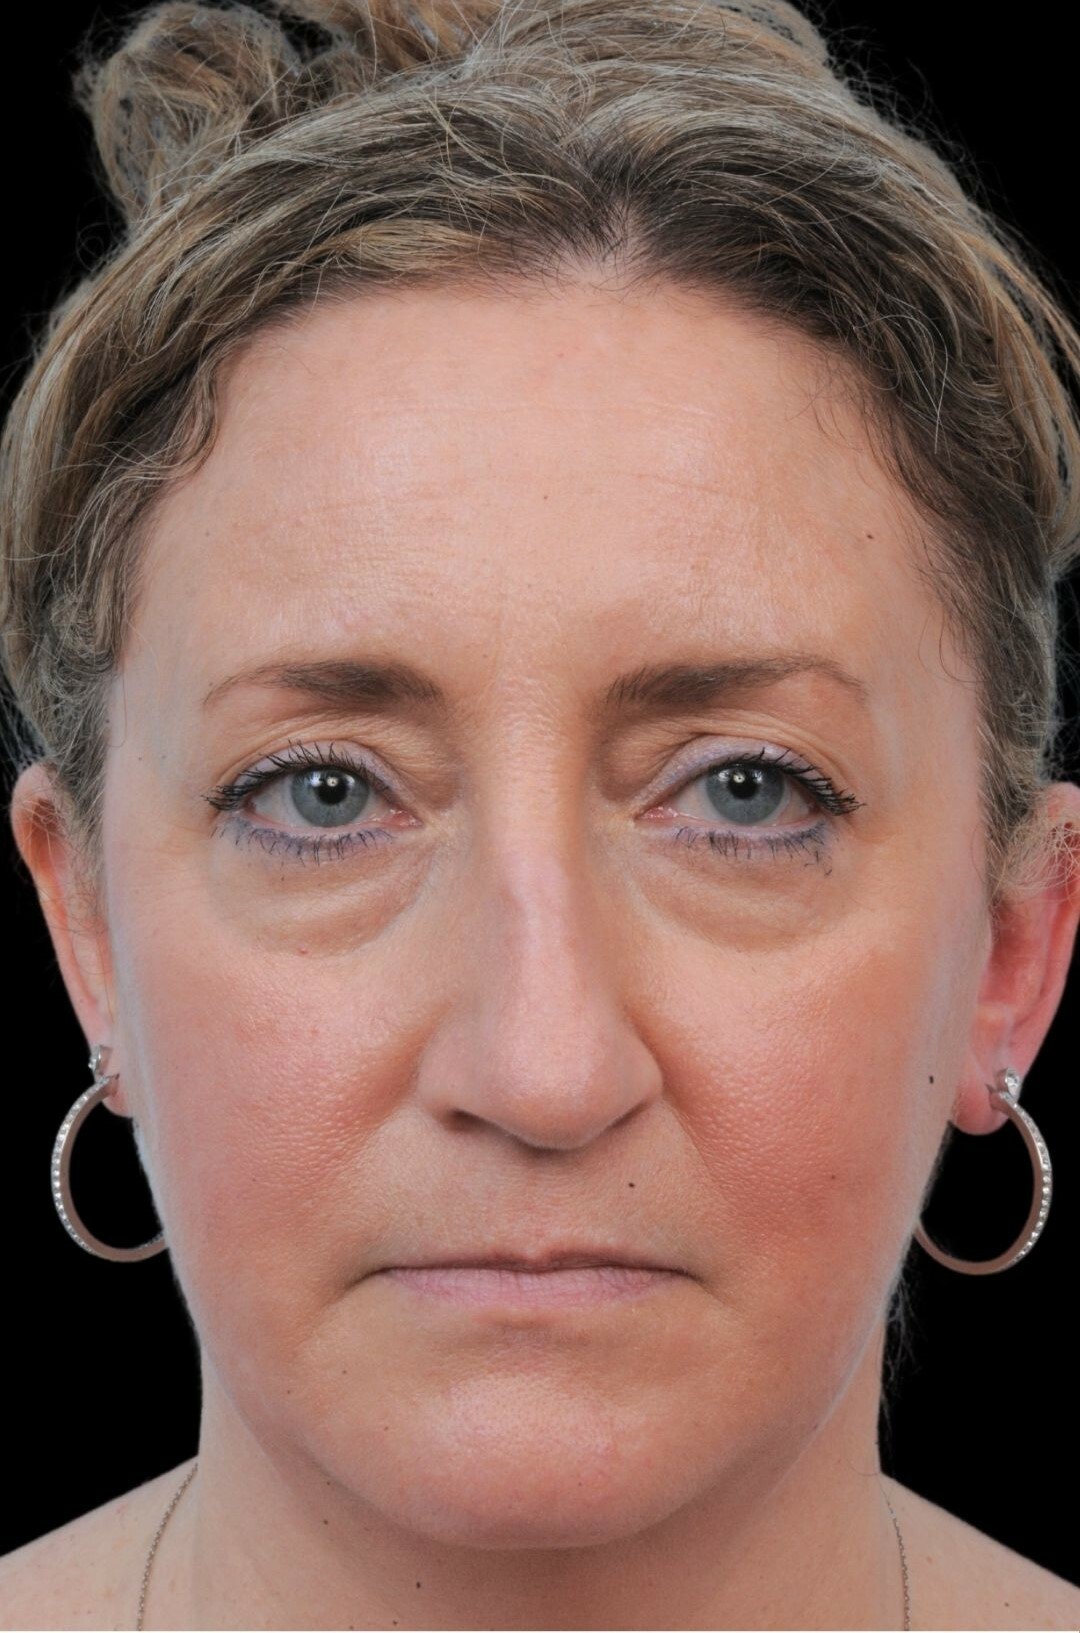 Photo of the patient’s face before the Rhinoplasty surgery. Patient 2 - Set 3